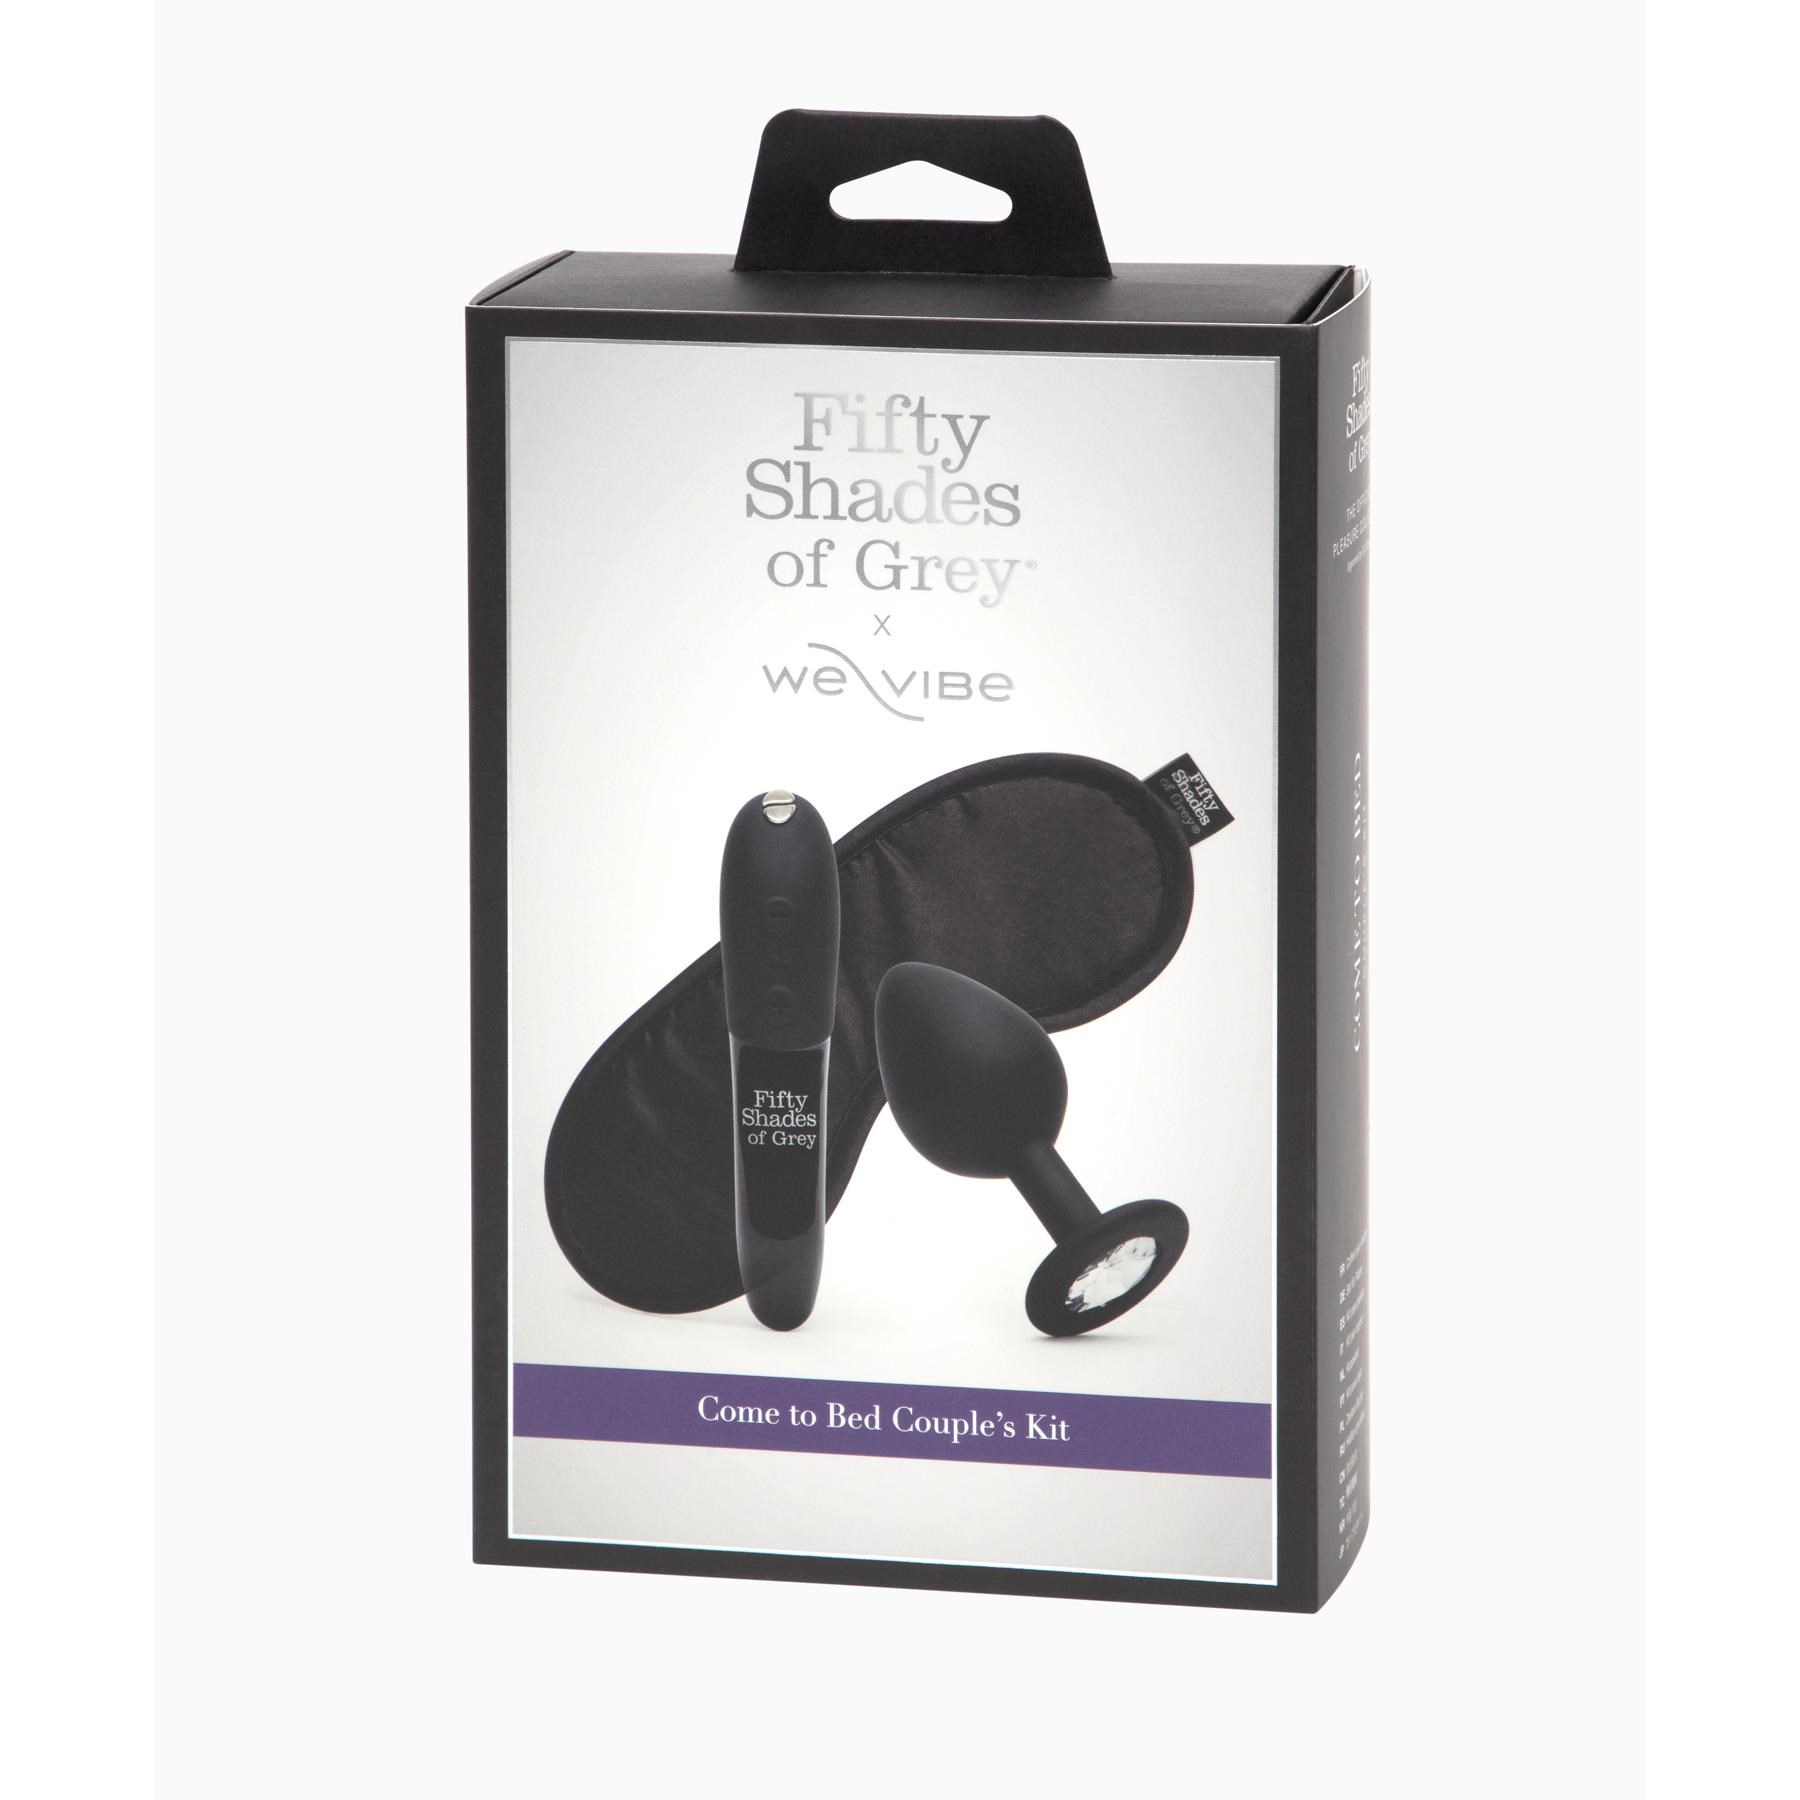 Fifty Shades of Grey & We-Vibe Come To Bed Couples Kit - Packaging